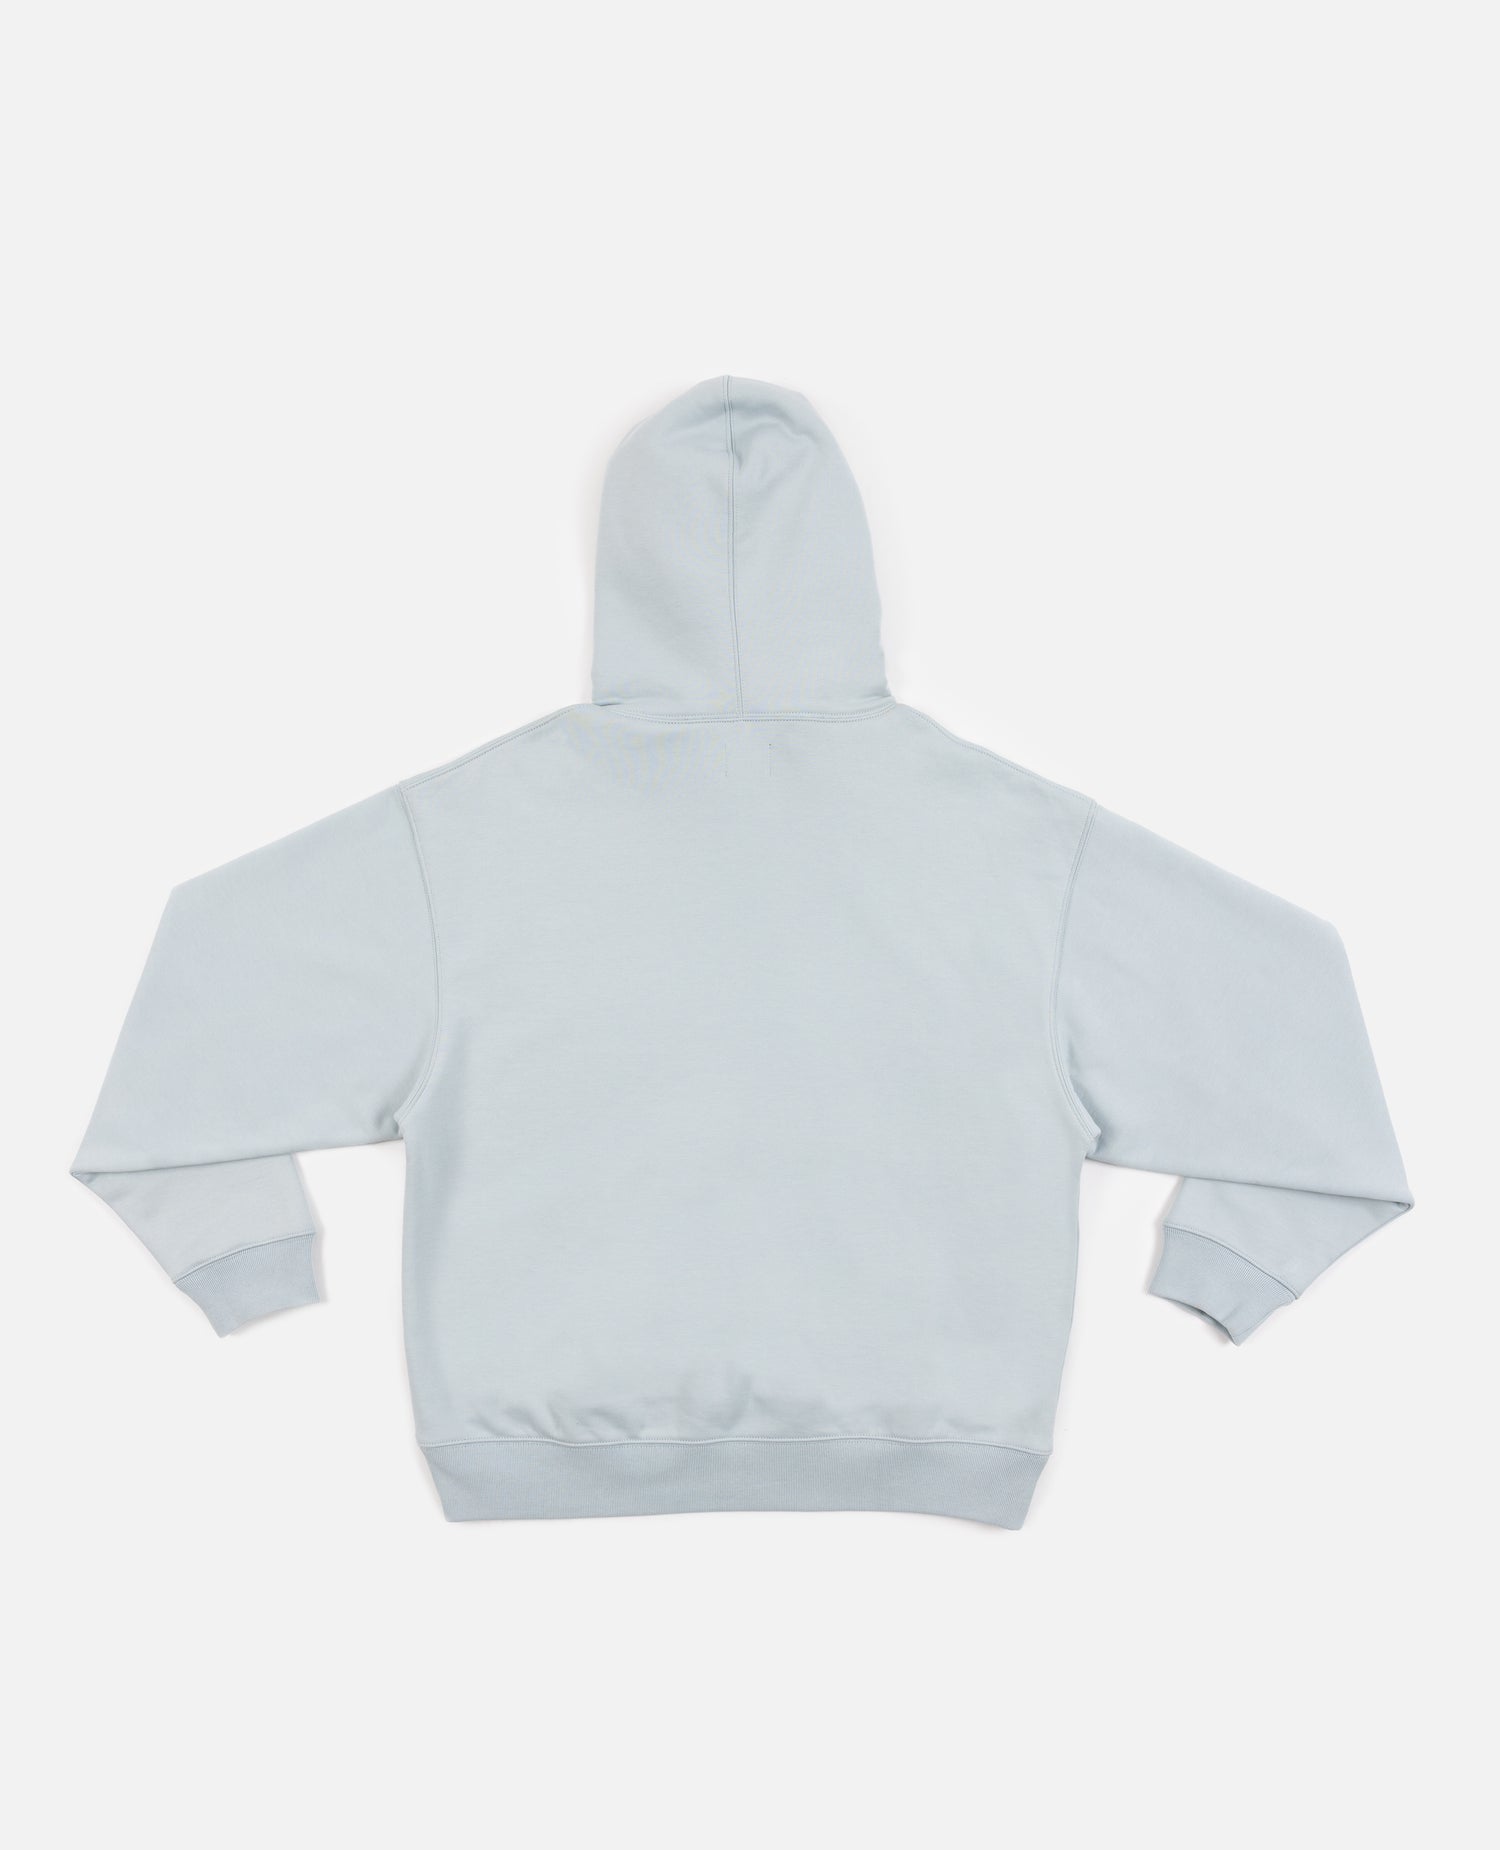 Patta Basic Hooded Sweater (Pearl Blue)